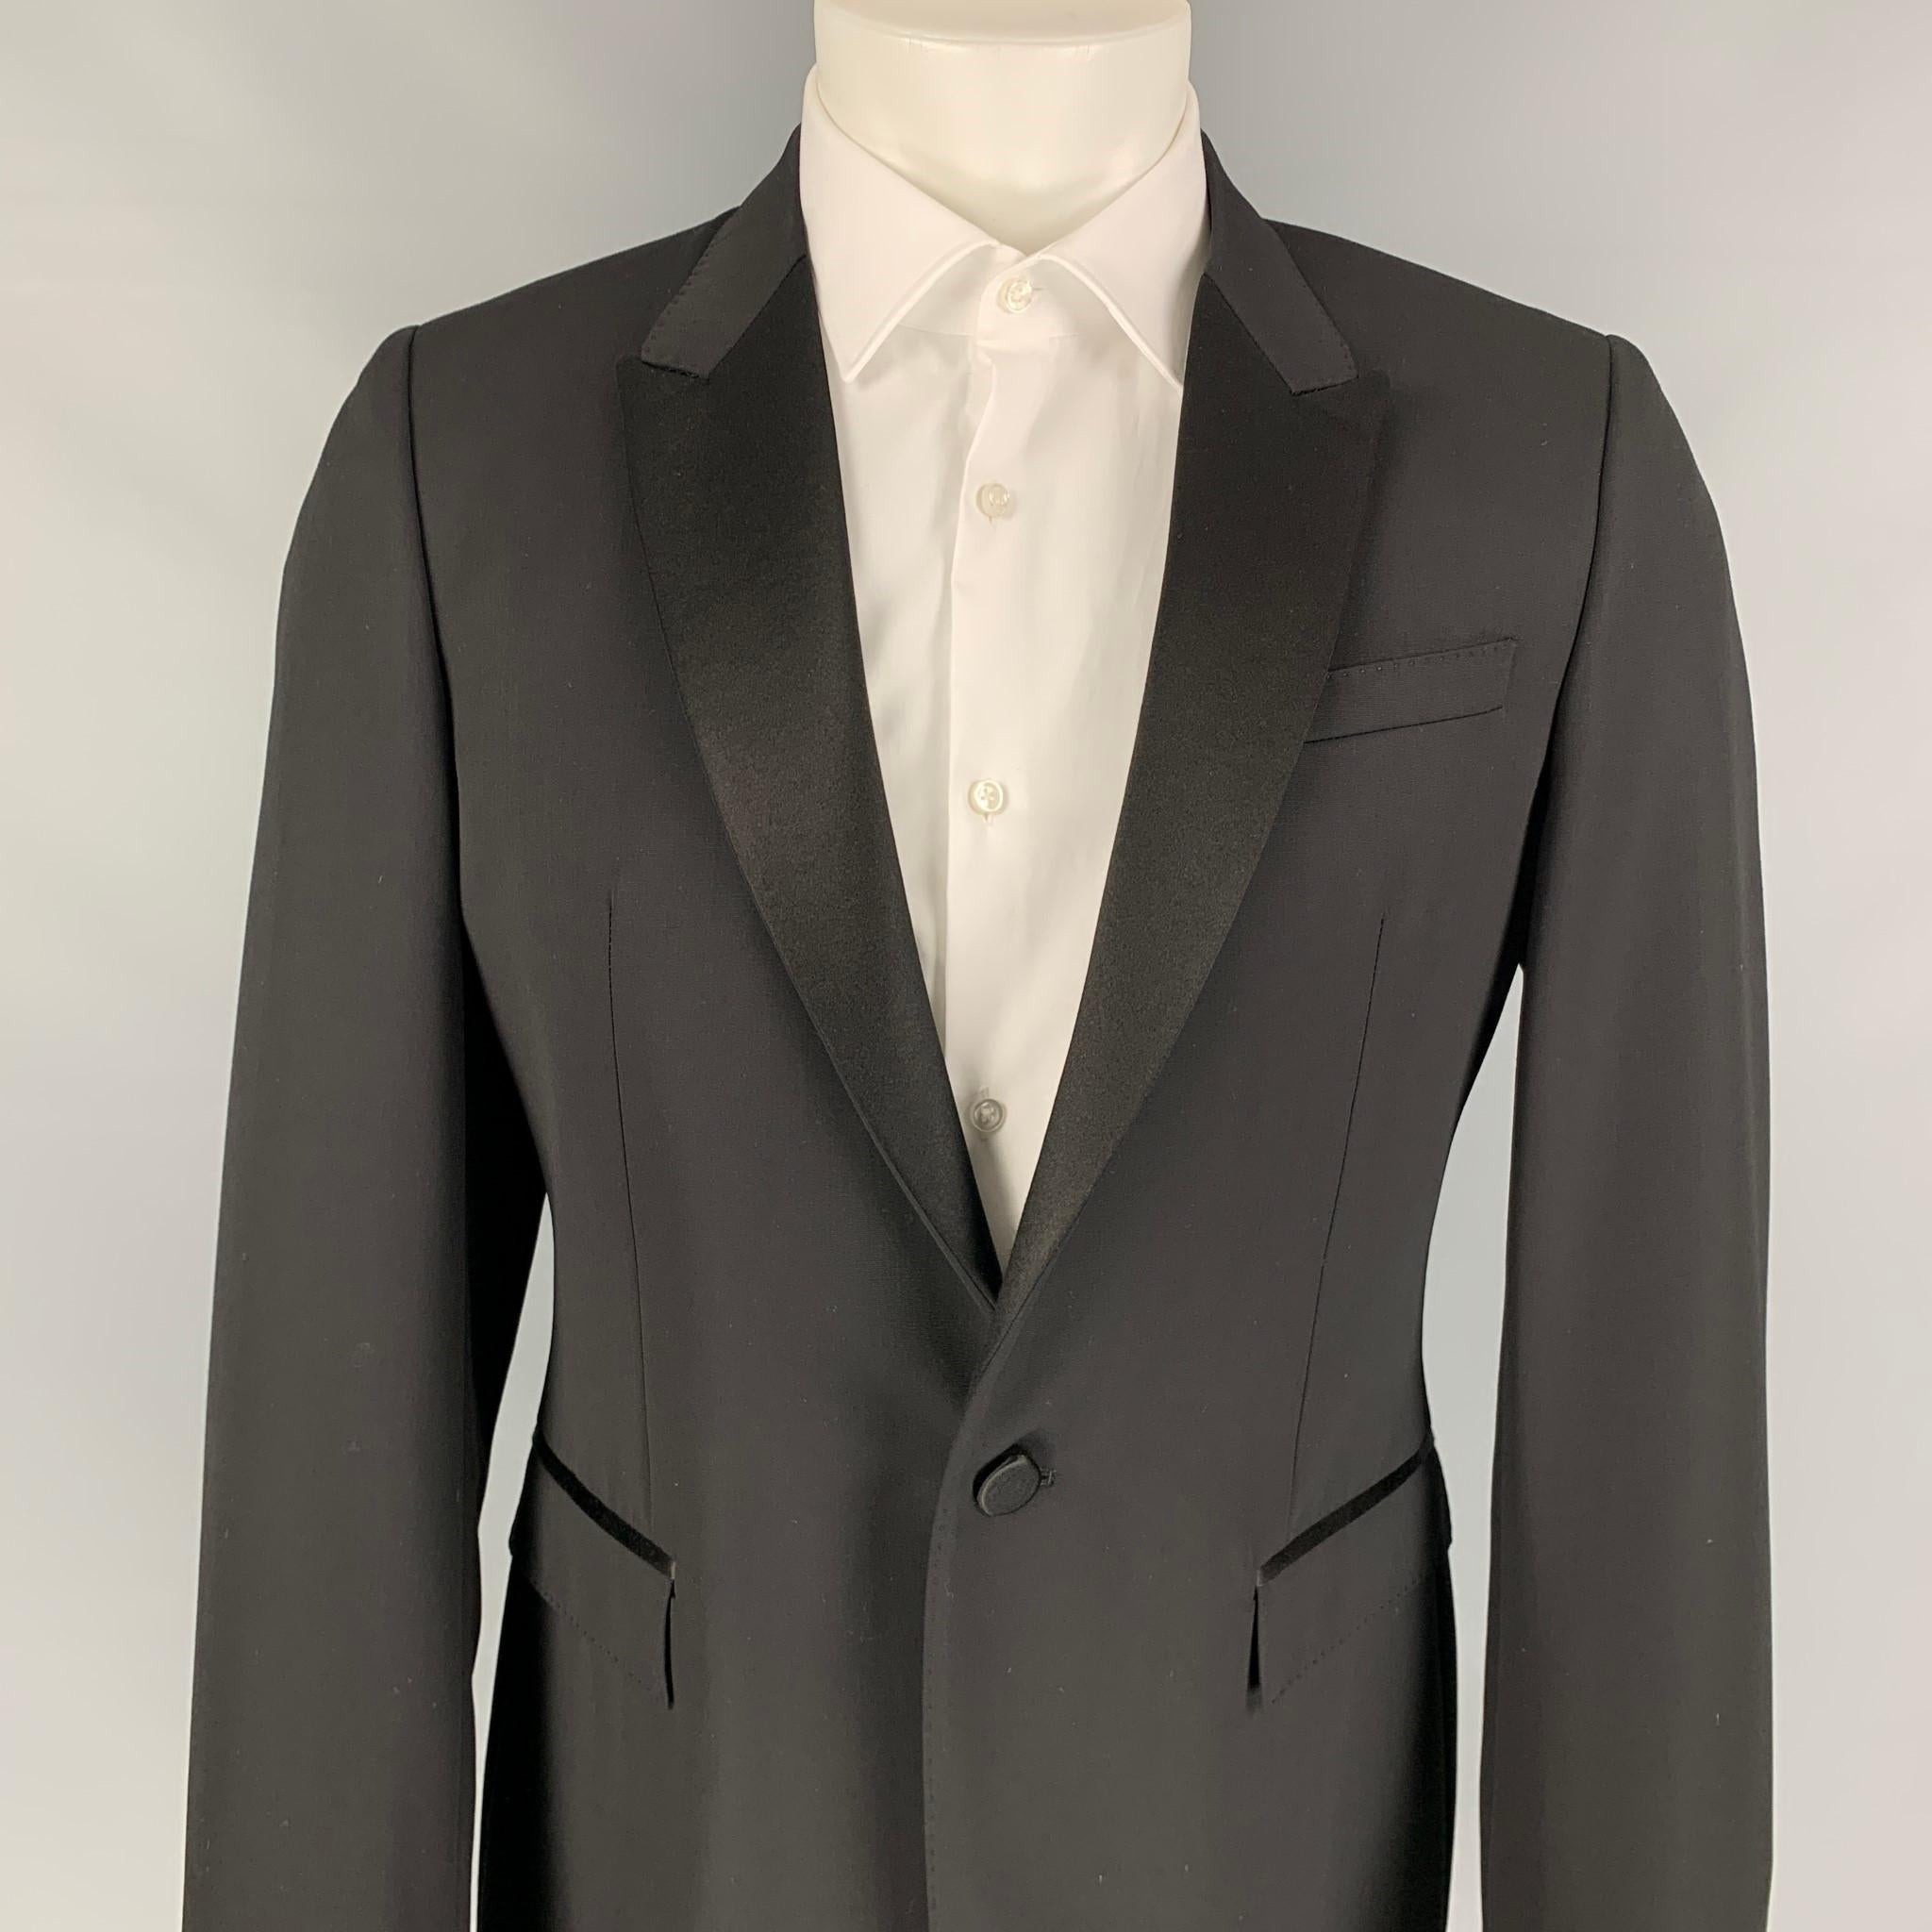 BURBERRY PRORSUM sport coat comes in a black wool with a full liner featuring a peak lapel, flap pockets, double back vent, and a single button closure. Made in Italy.

New With Tags. 
Marked: 40
Original Retail Price: